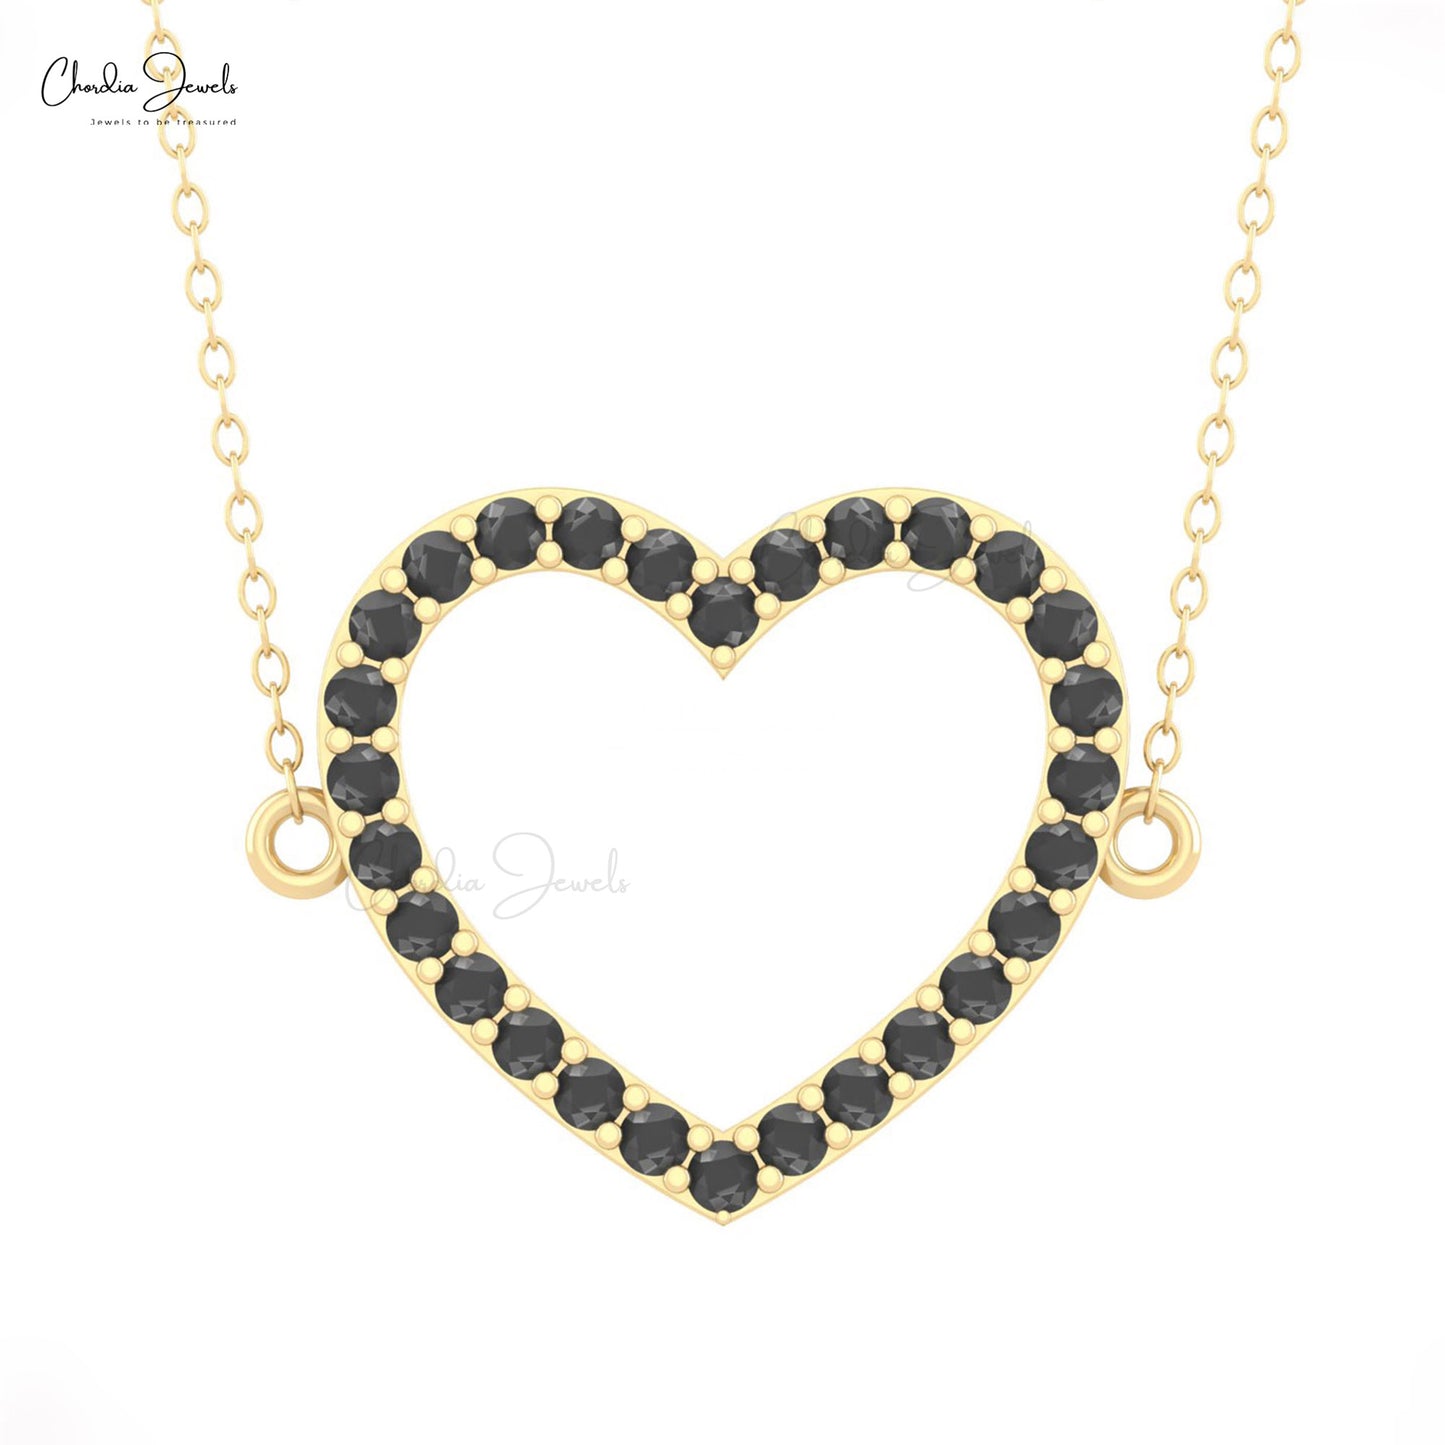 Natural Black Diamond Heart Necklace in 14k Real Gold 2MM April Birthstone Charm Necklace